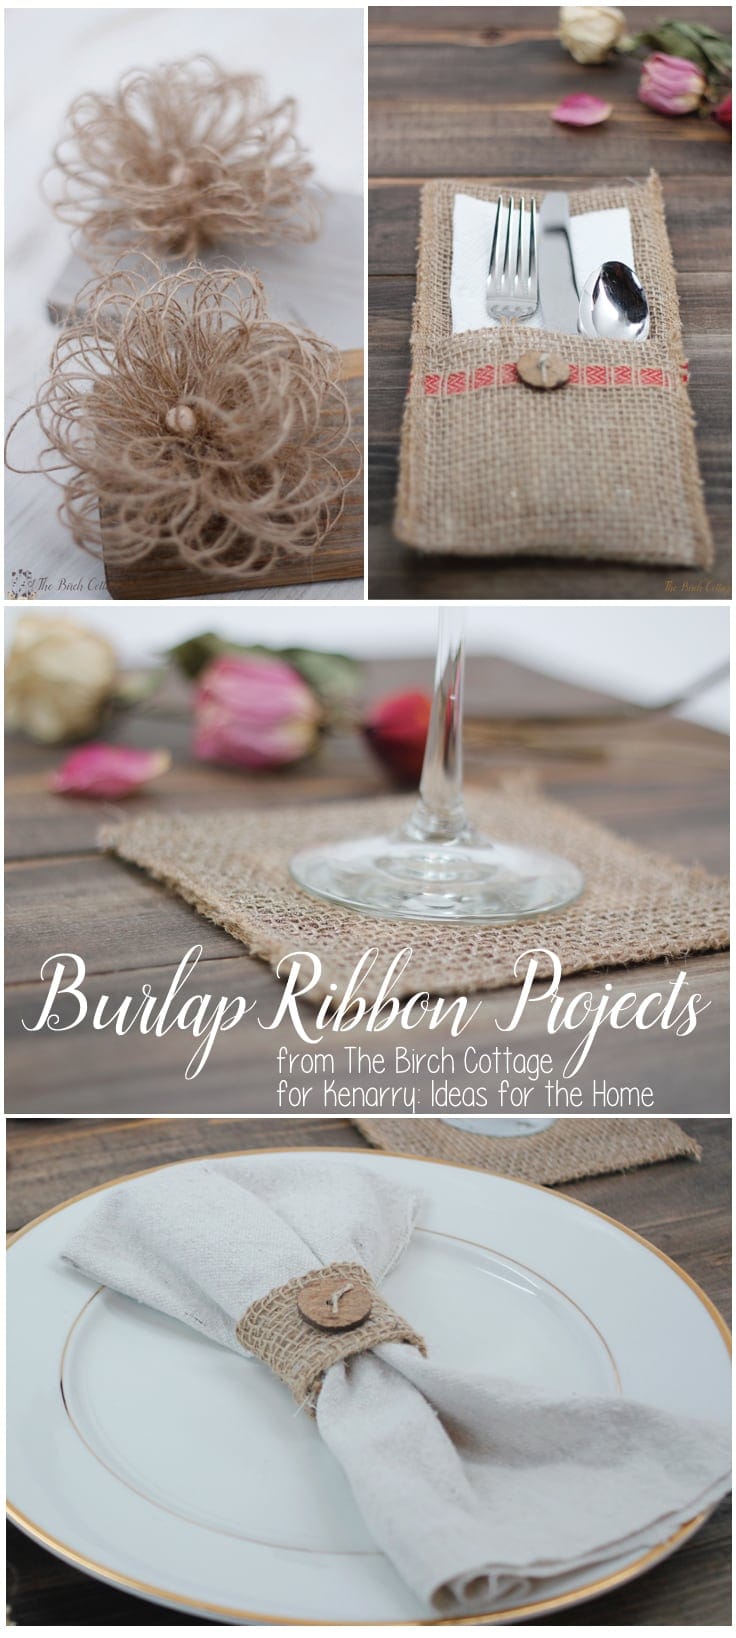 Four easy burlap ribbon projects from The Birch Cottage.